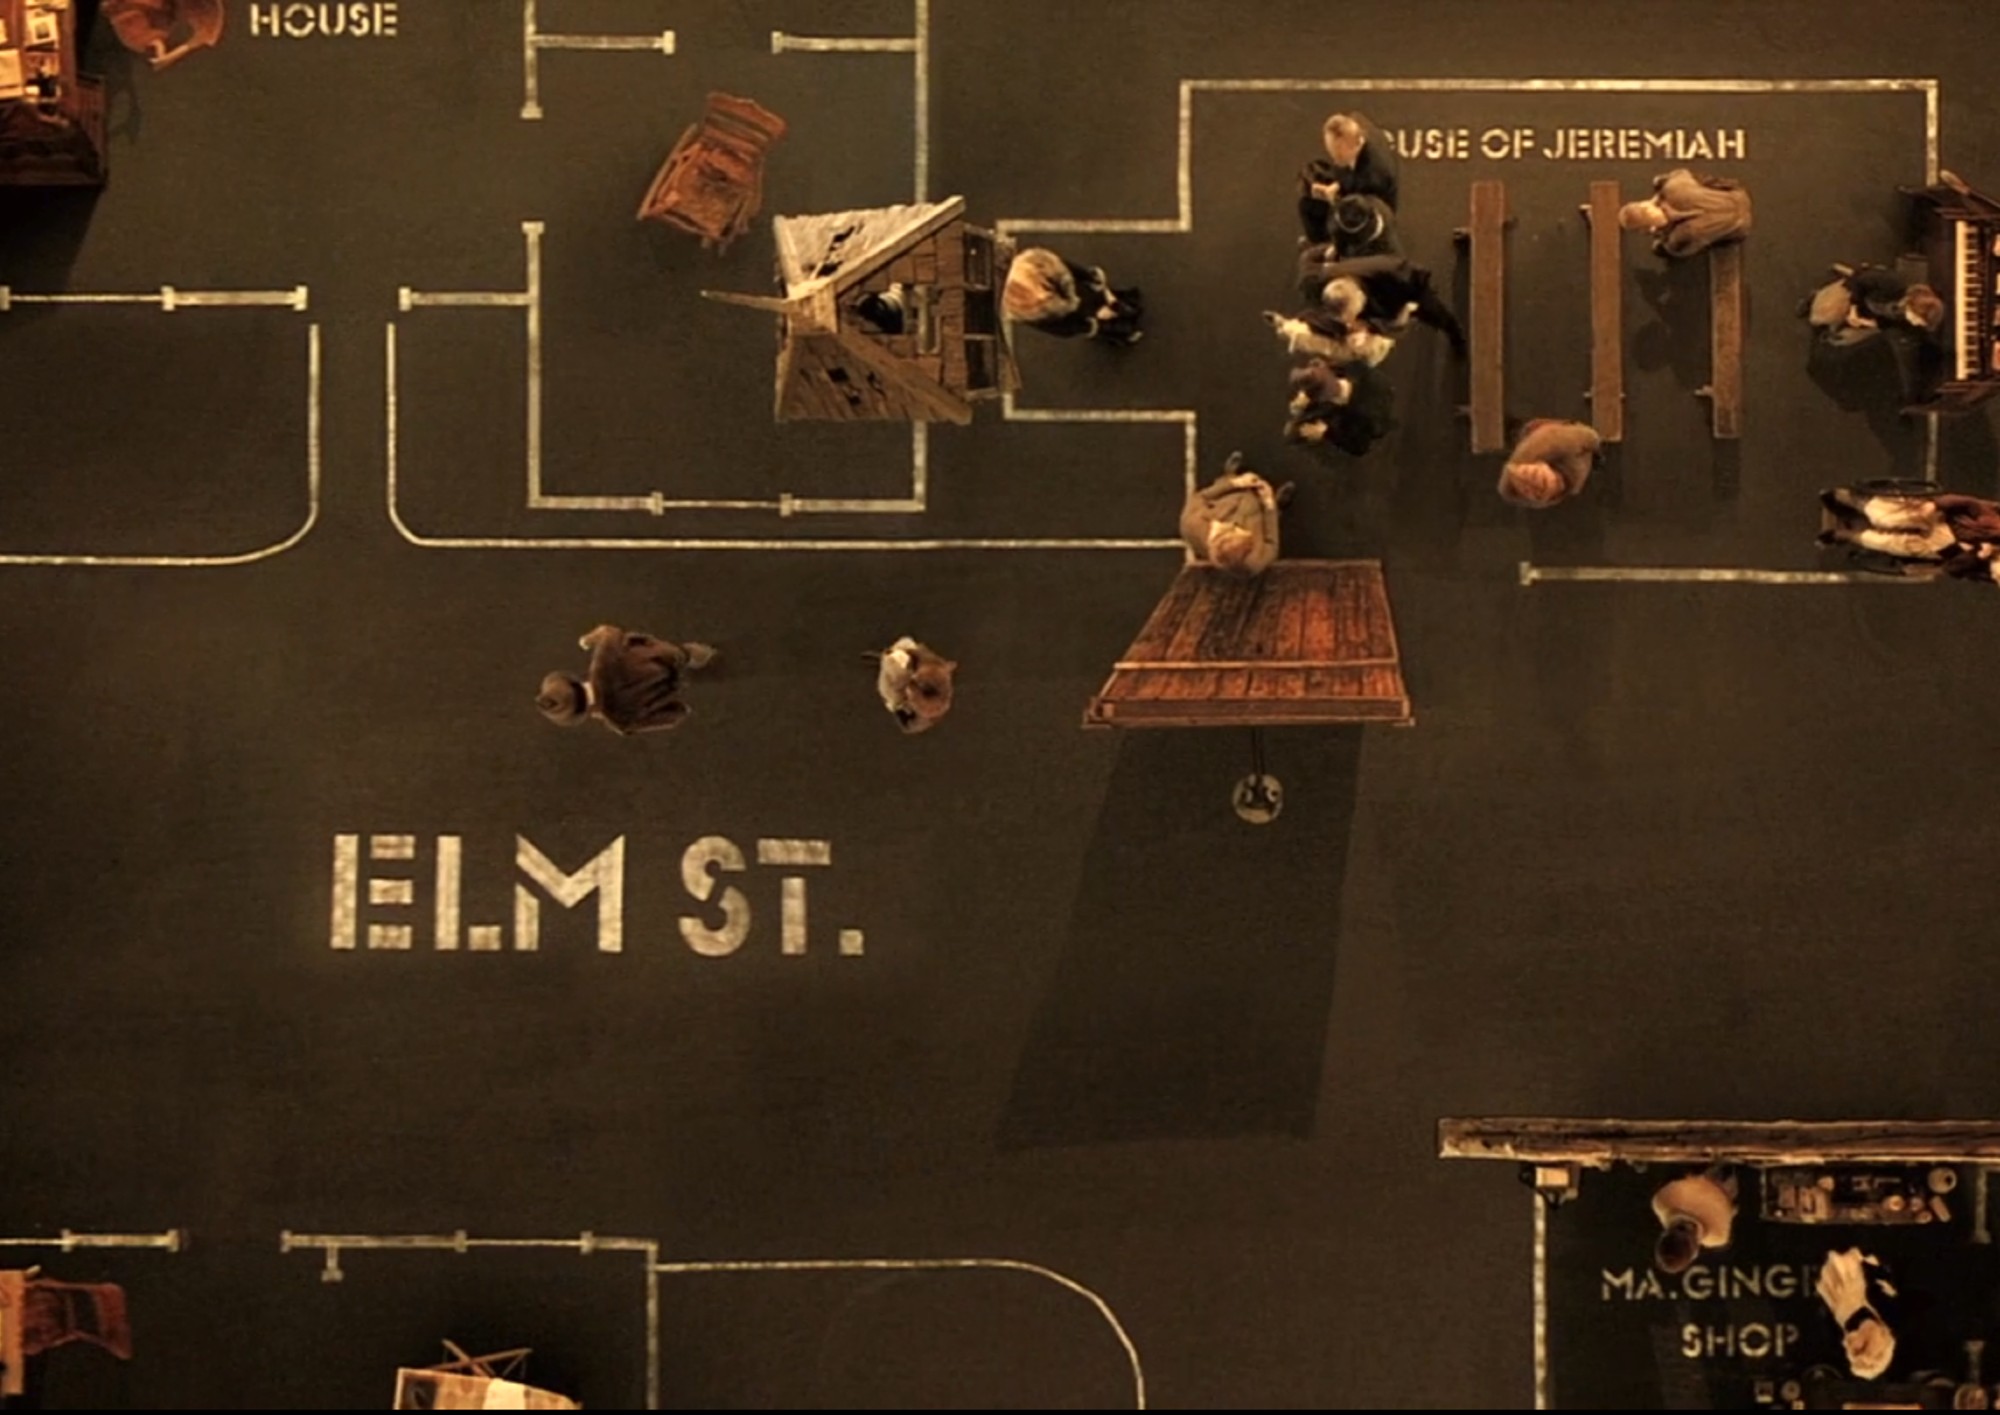 Image from the motion picture Dogville